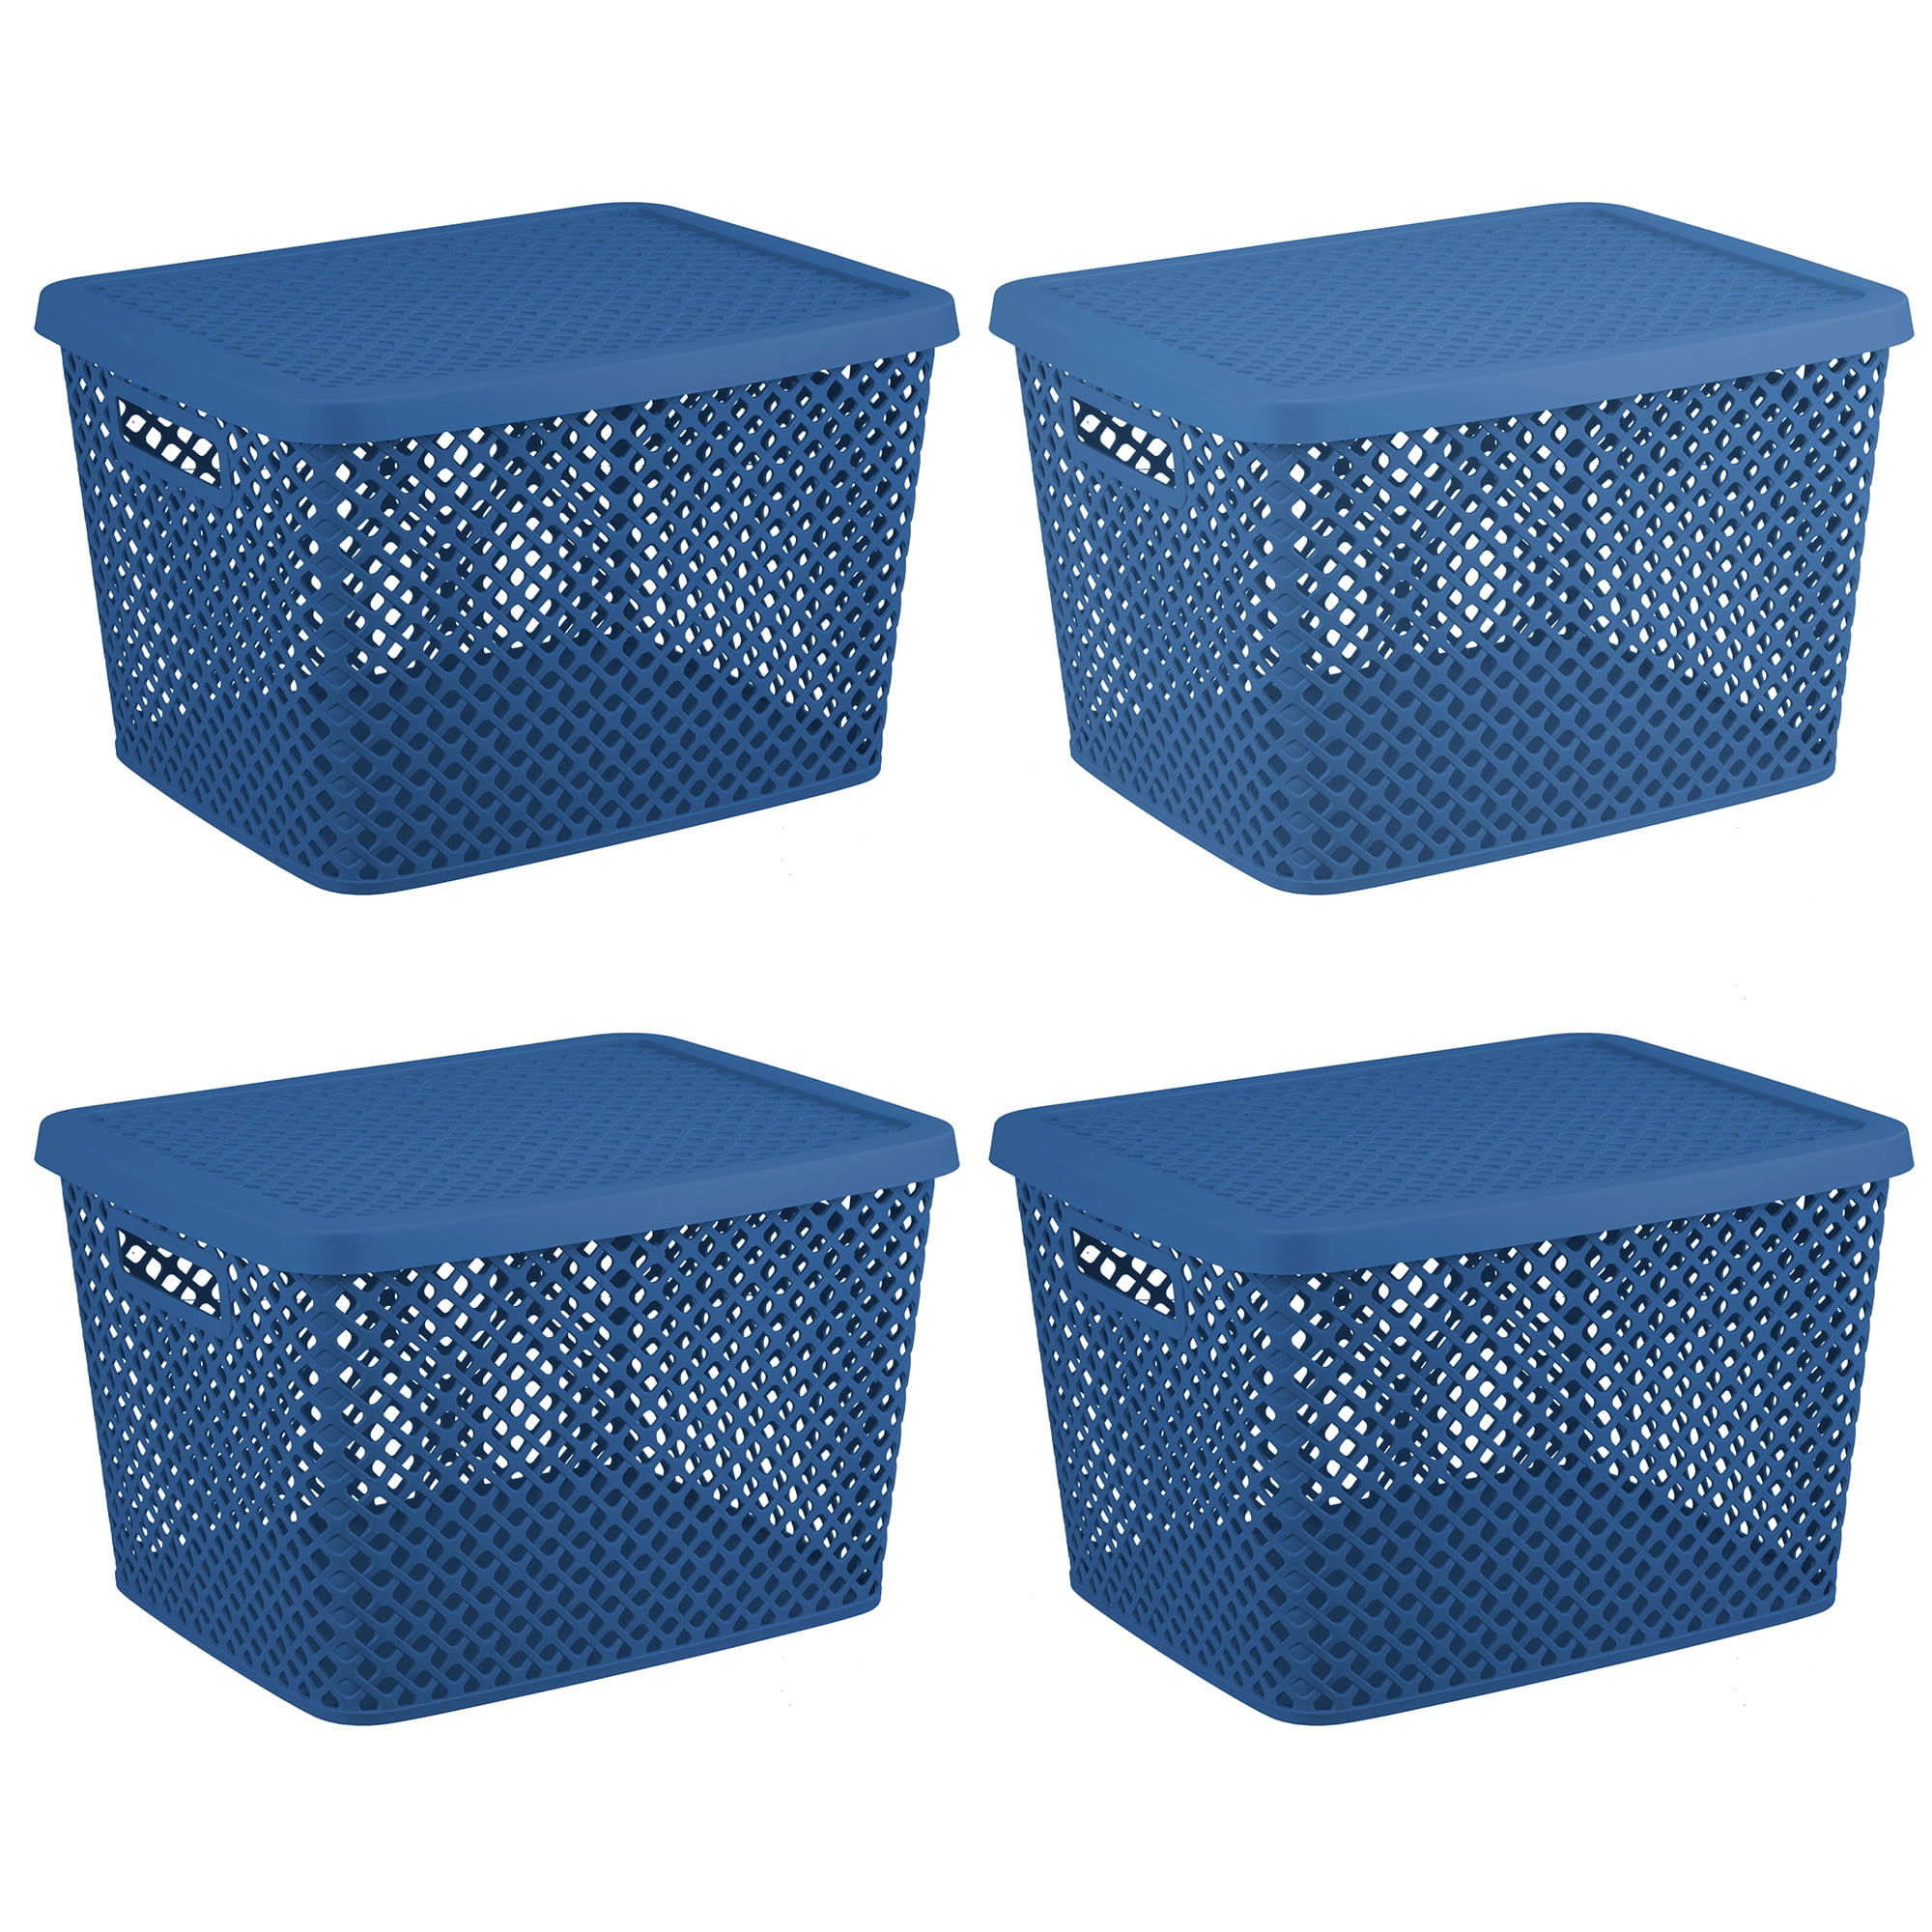 LARGE FULL WIRE MESH BASKET WITH HINGED REMOVABLE LID LOCK 